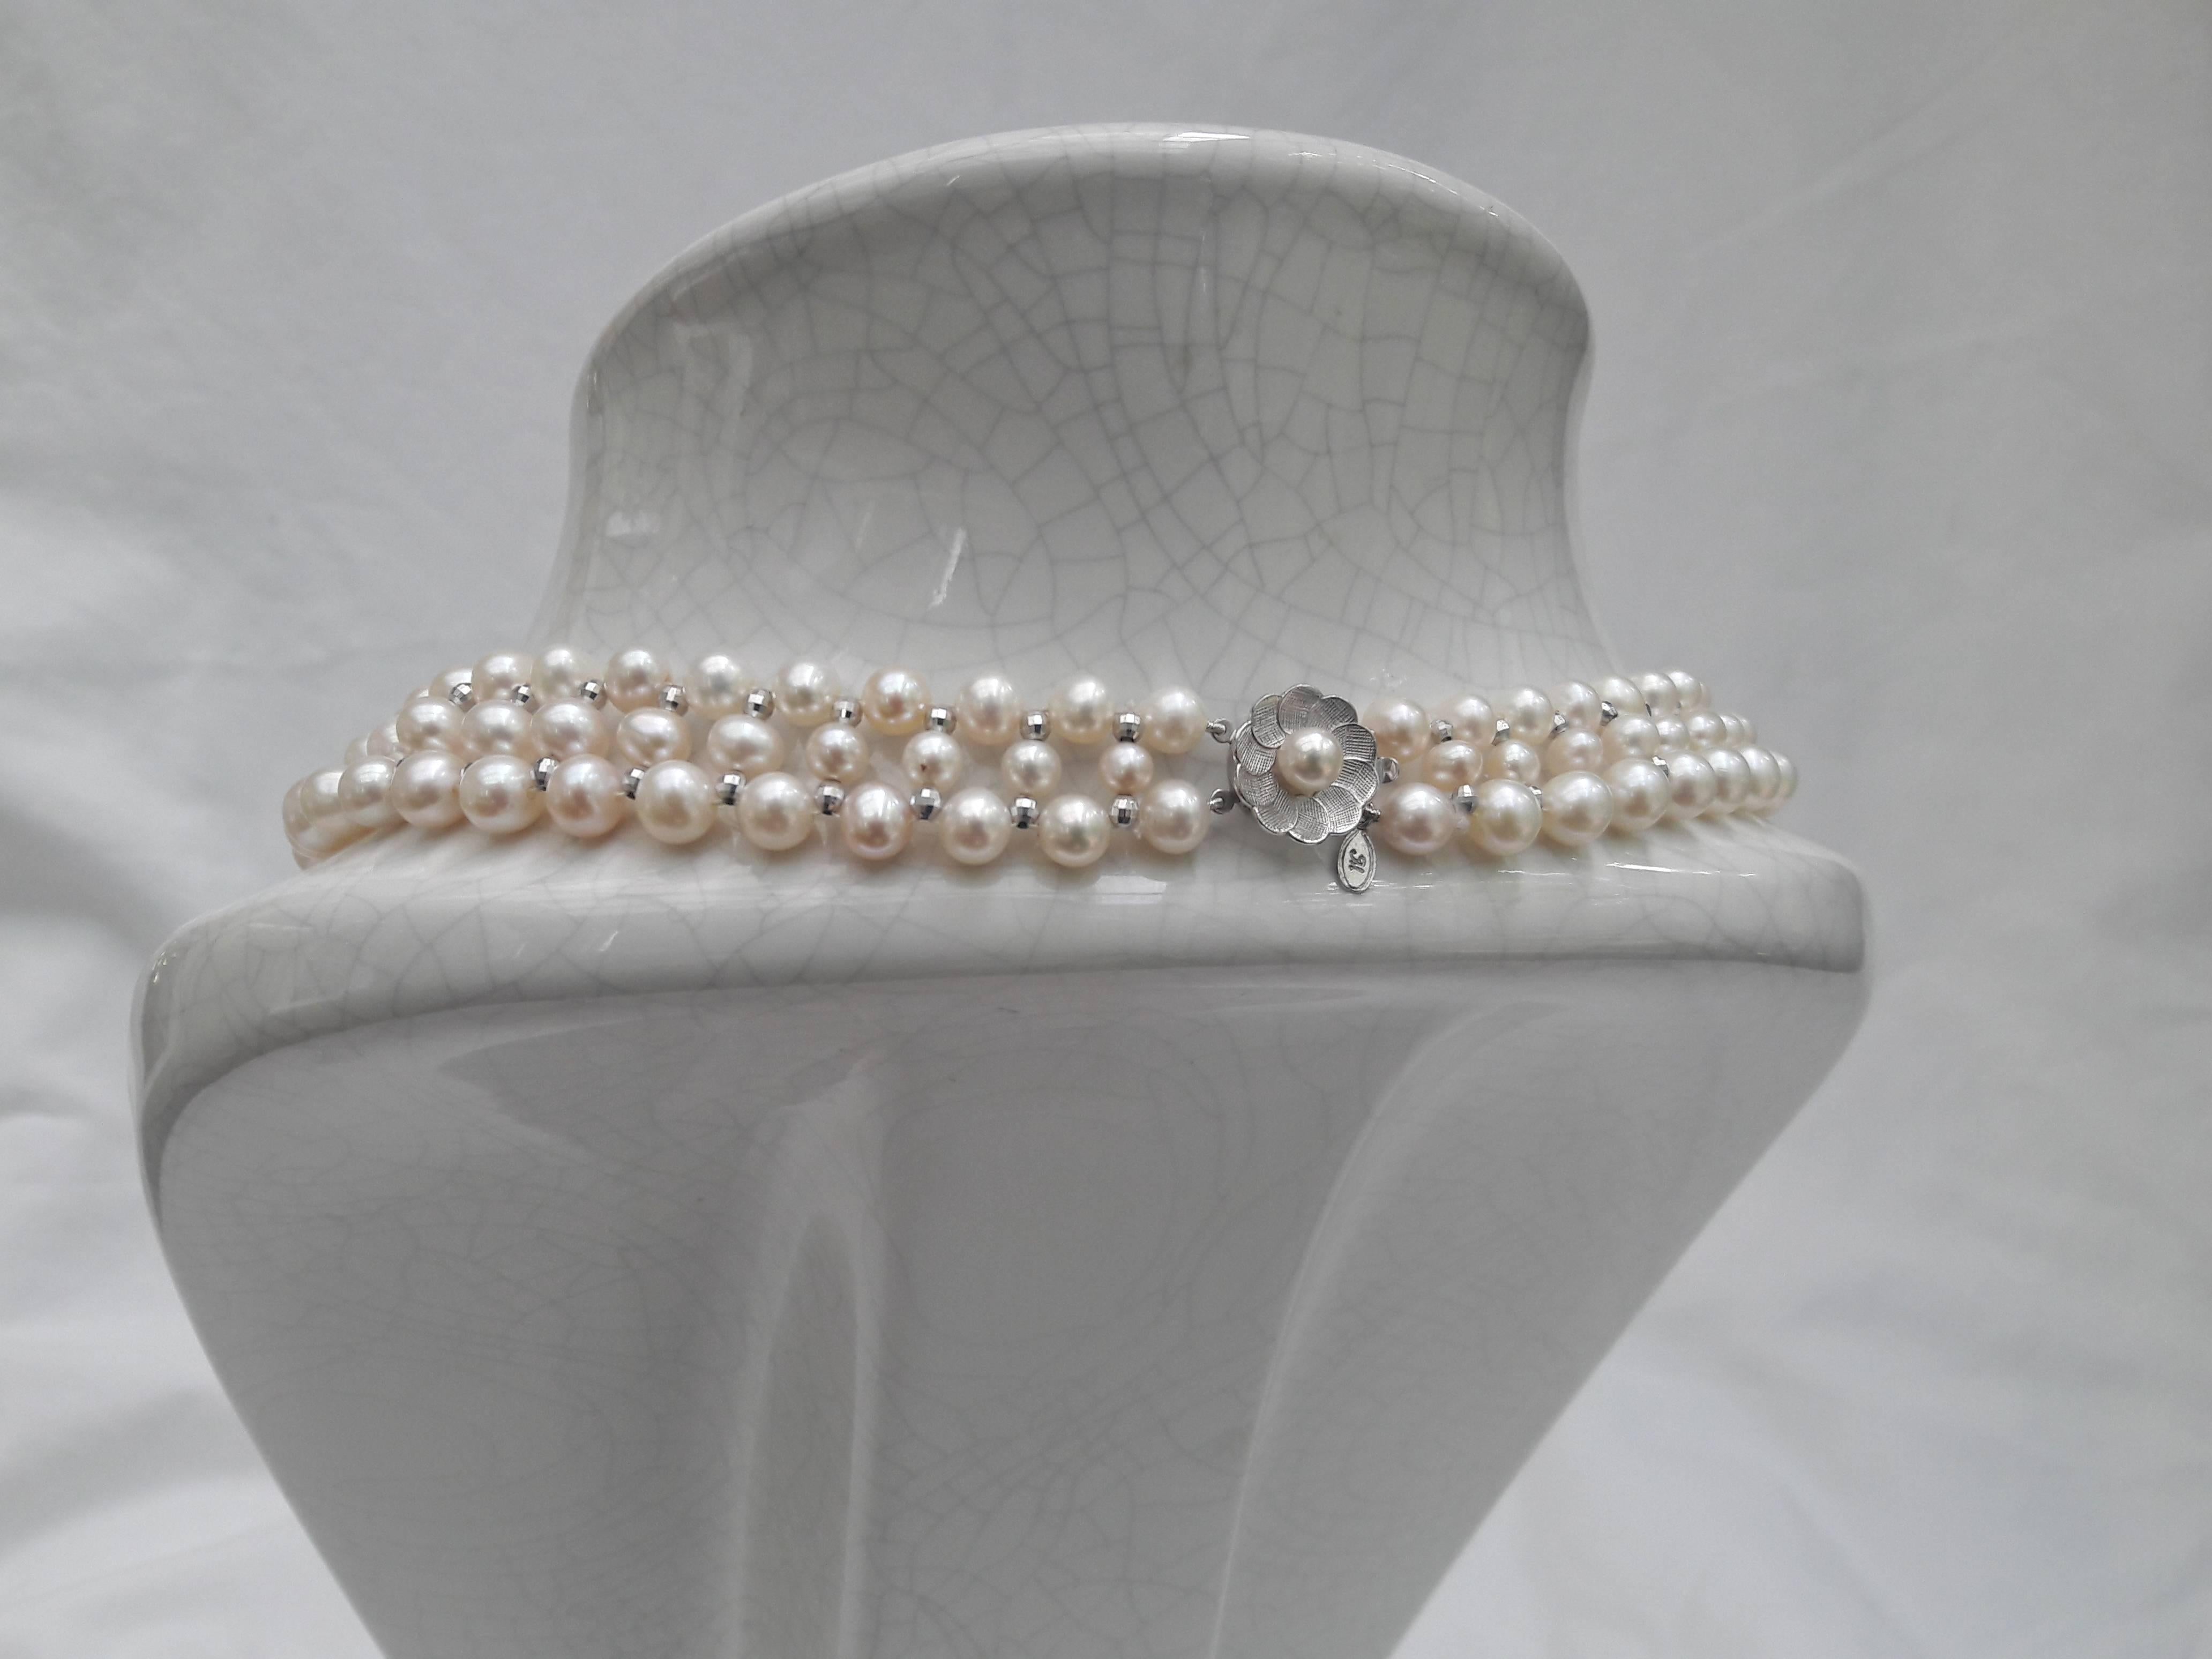 This intricately hand woven necklace is made of 5-6.5 mm cultured pearls with 14 k white gold faceted beads. Necklace is tapered in design to fit perfectly along the curve of the neckline.

Locking clasp is made of 14 k white gold and styled as a